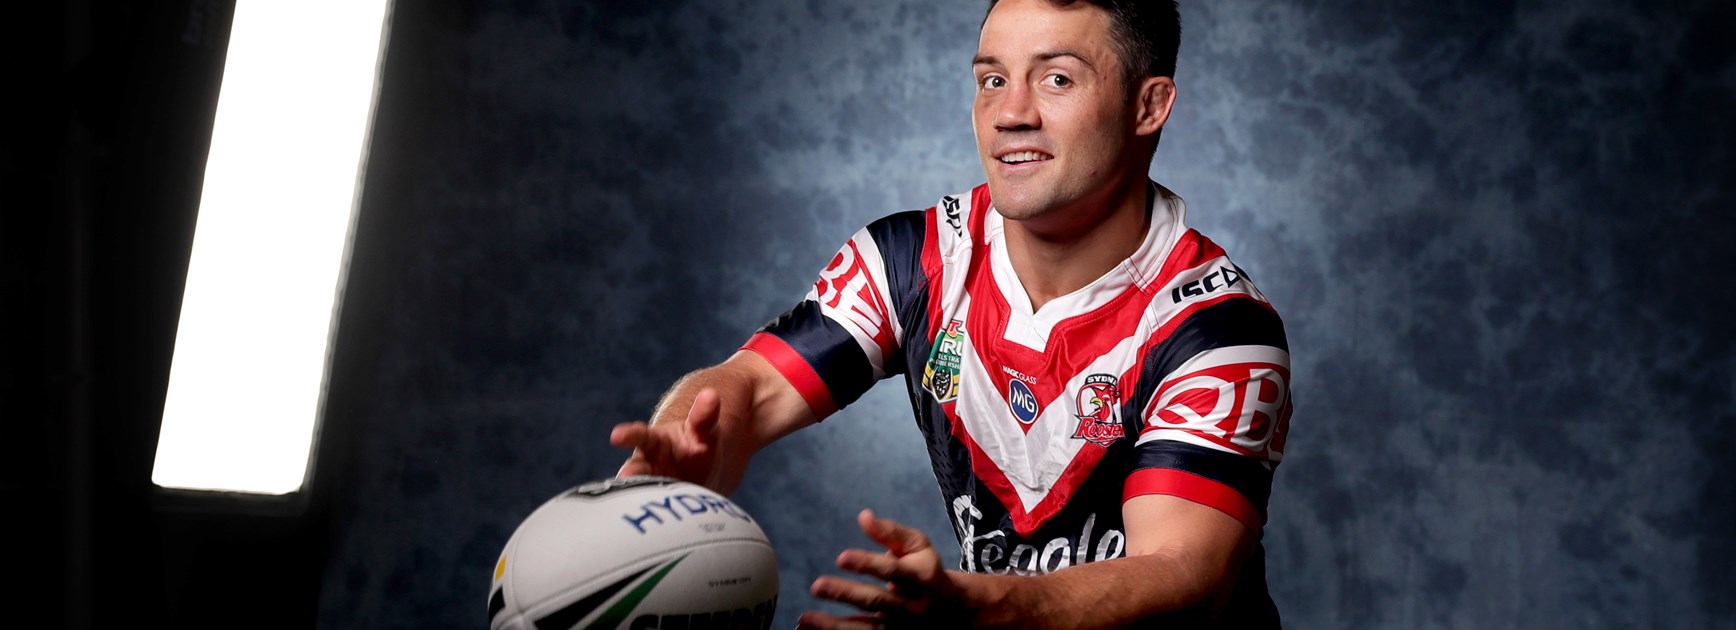 Roosters right edge wowed by Cronk influence